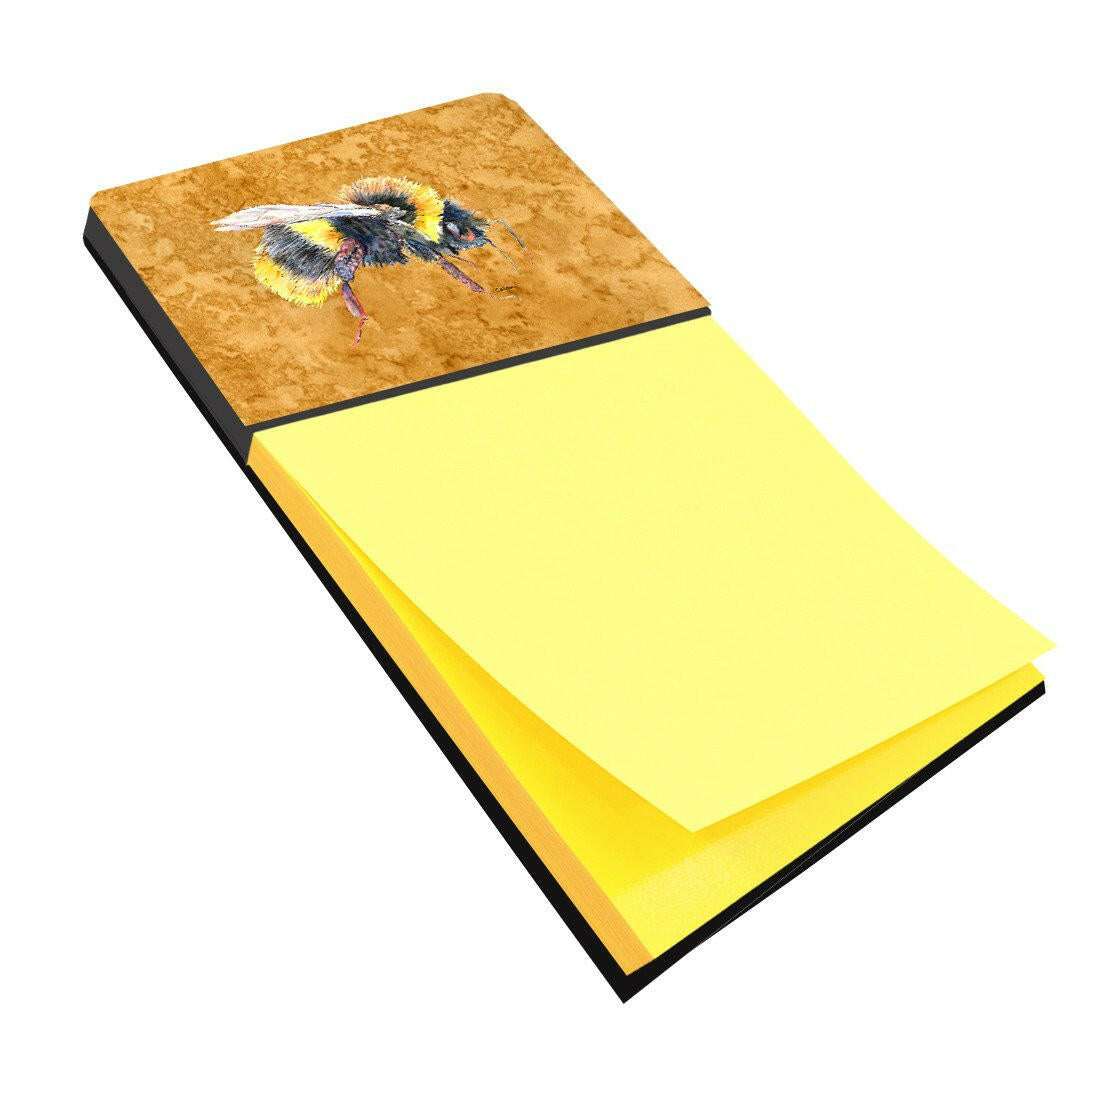 Bee on Gold Refiillable Sticky Note Holder or Postit Note Dispenser 8850SN by Caroline's Treasures